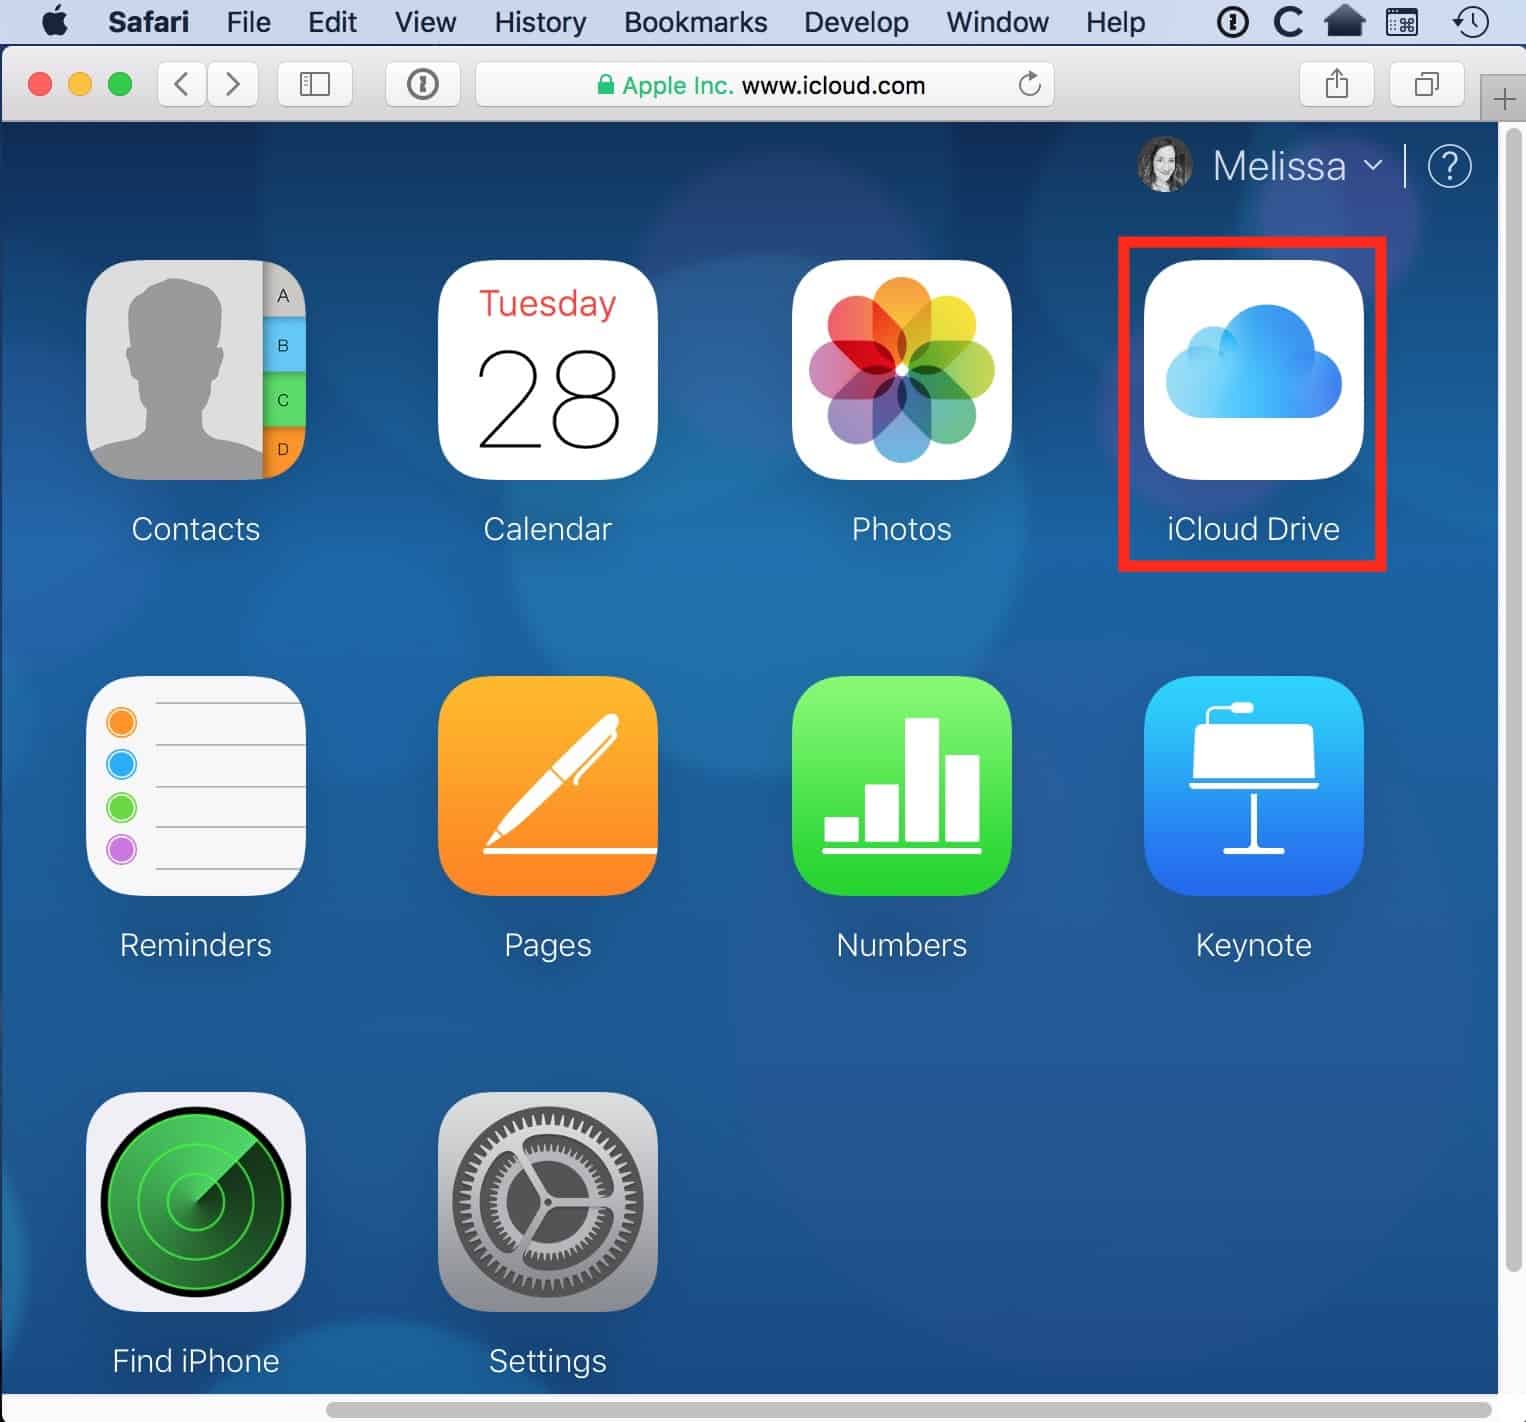 iCloud Drive Button in Web browser